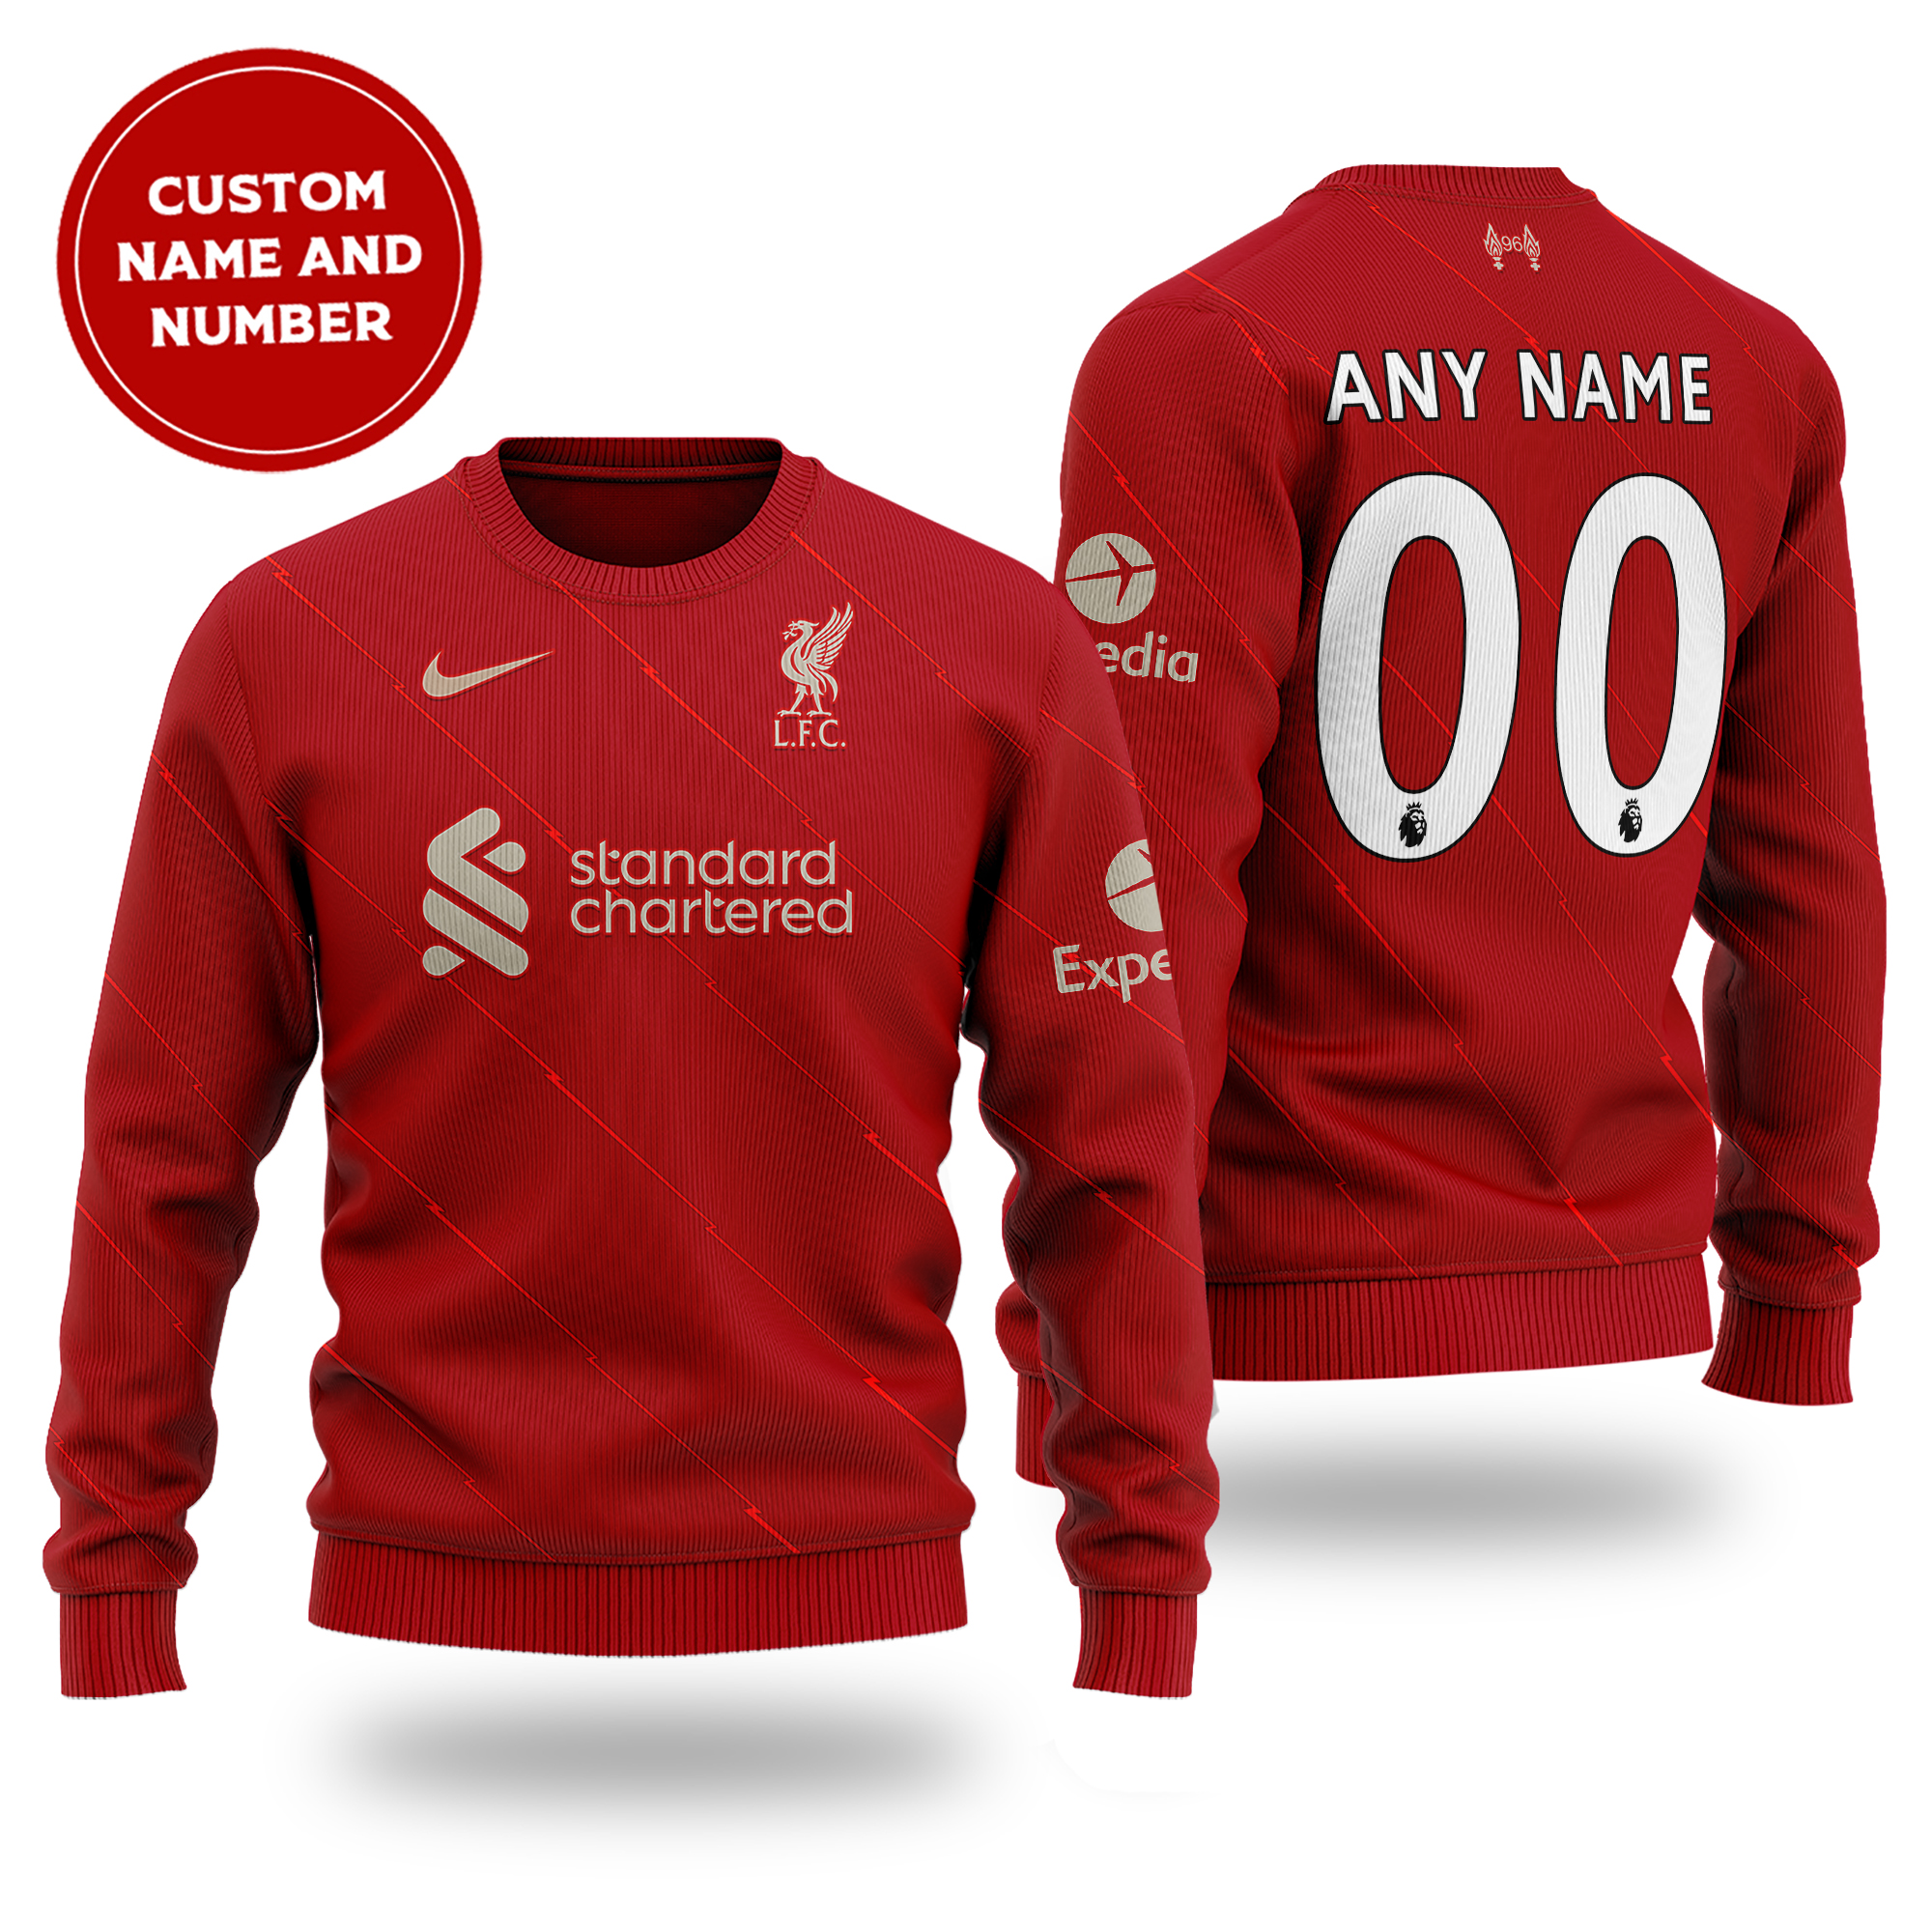 Primier League Liverpool FC cutom name and number sweater